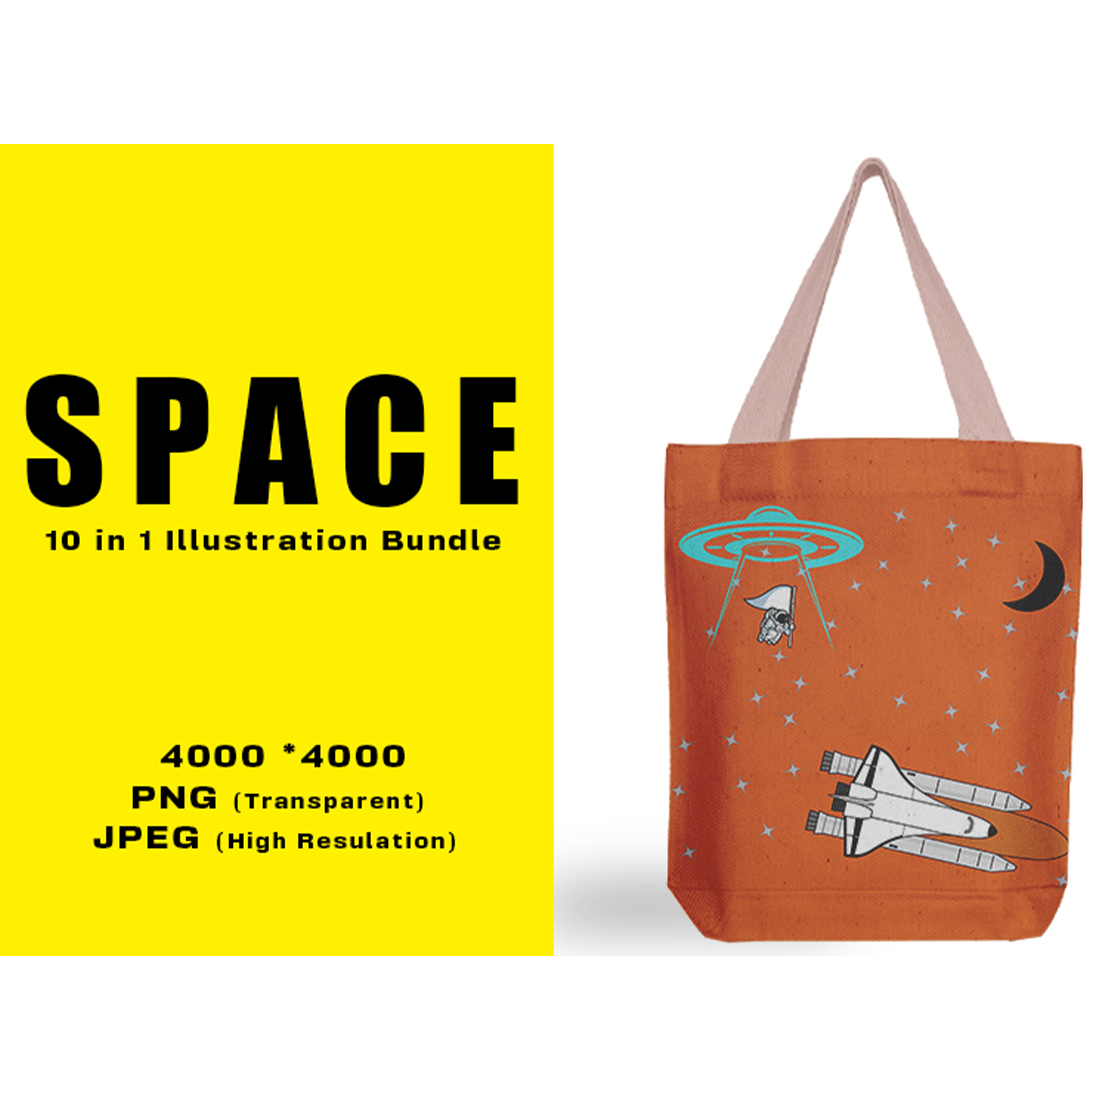 Image of a bag with an enchanting print on the theme of space